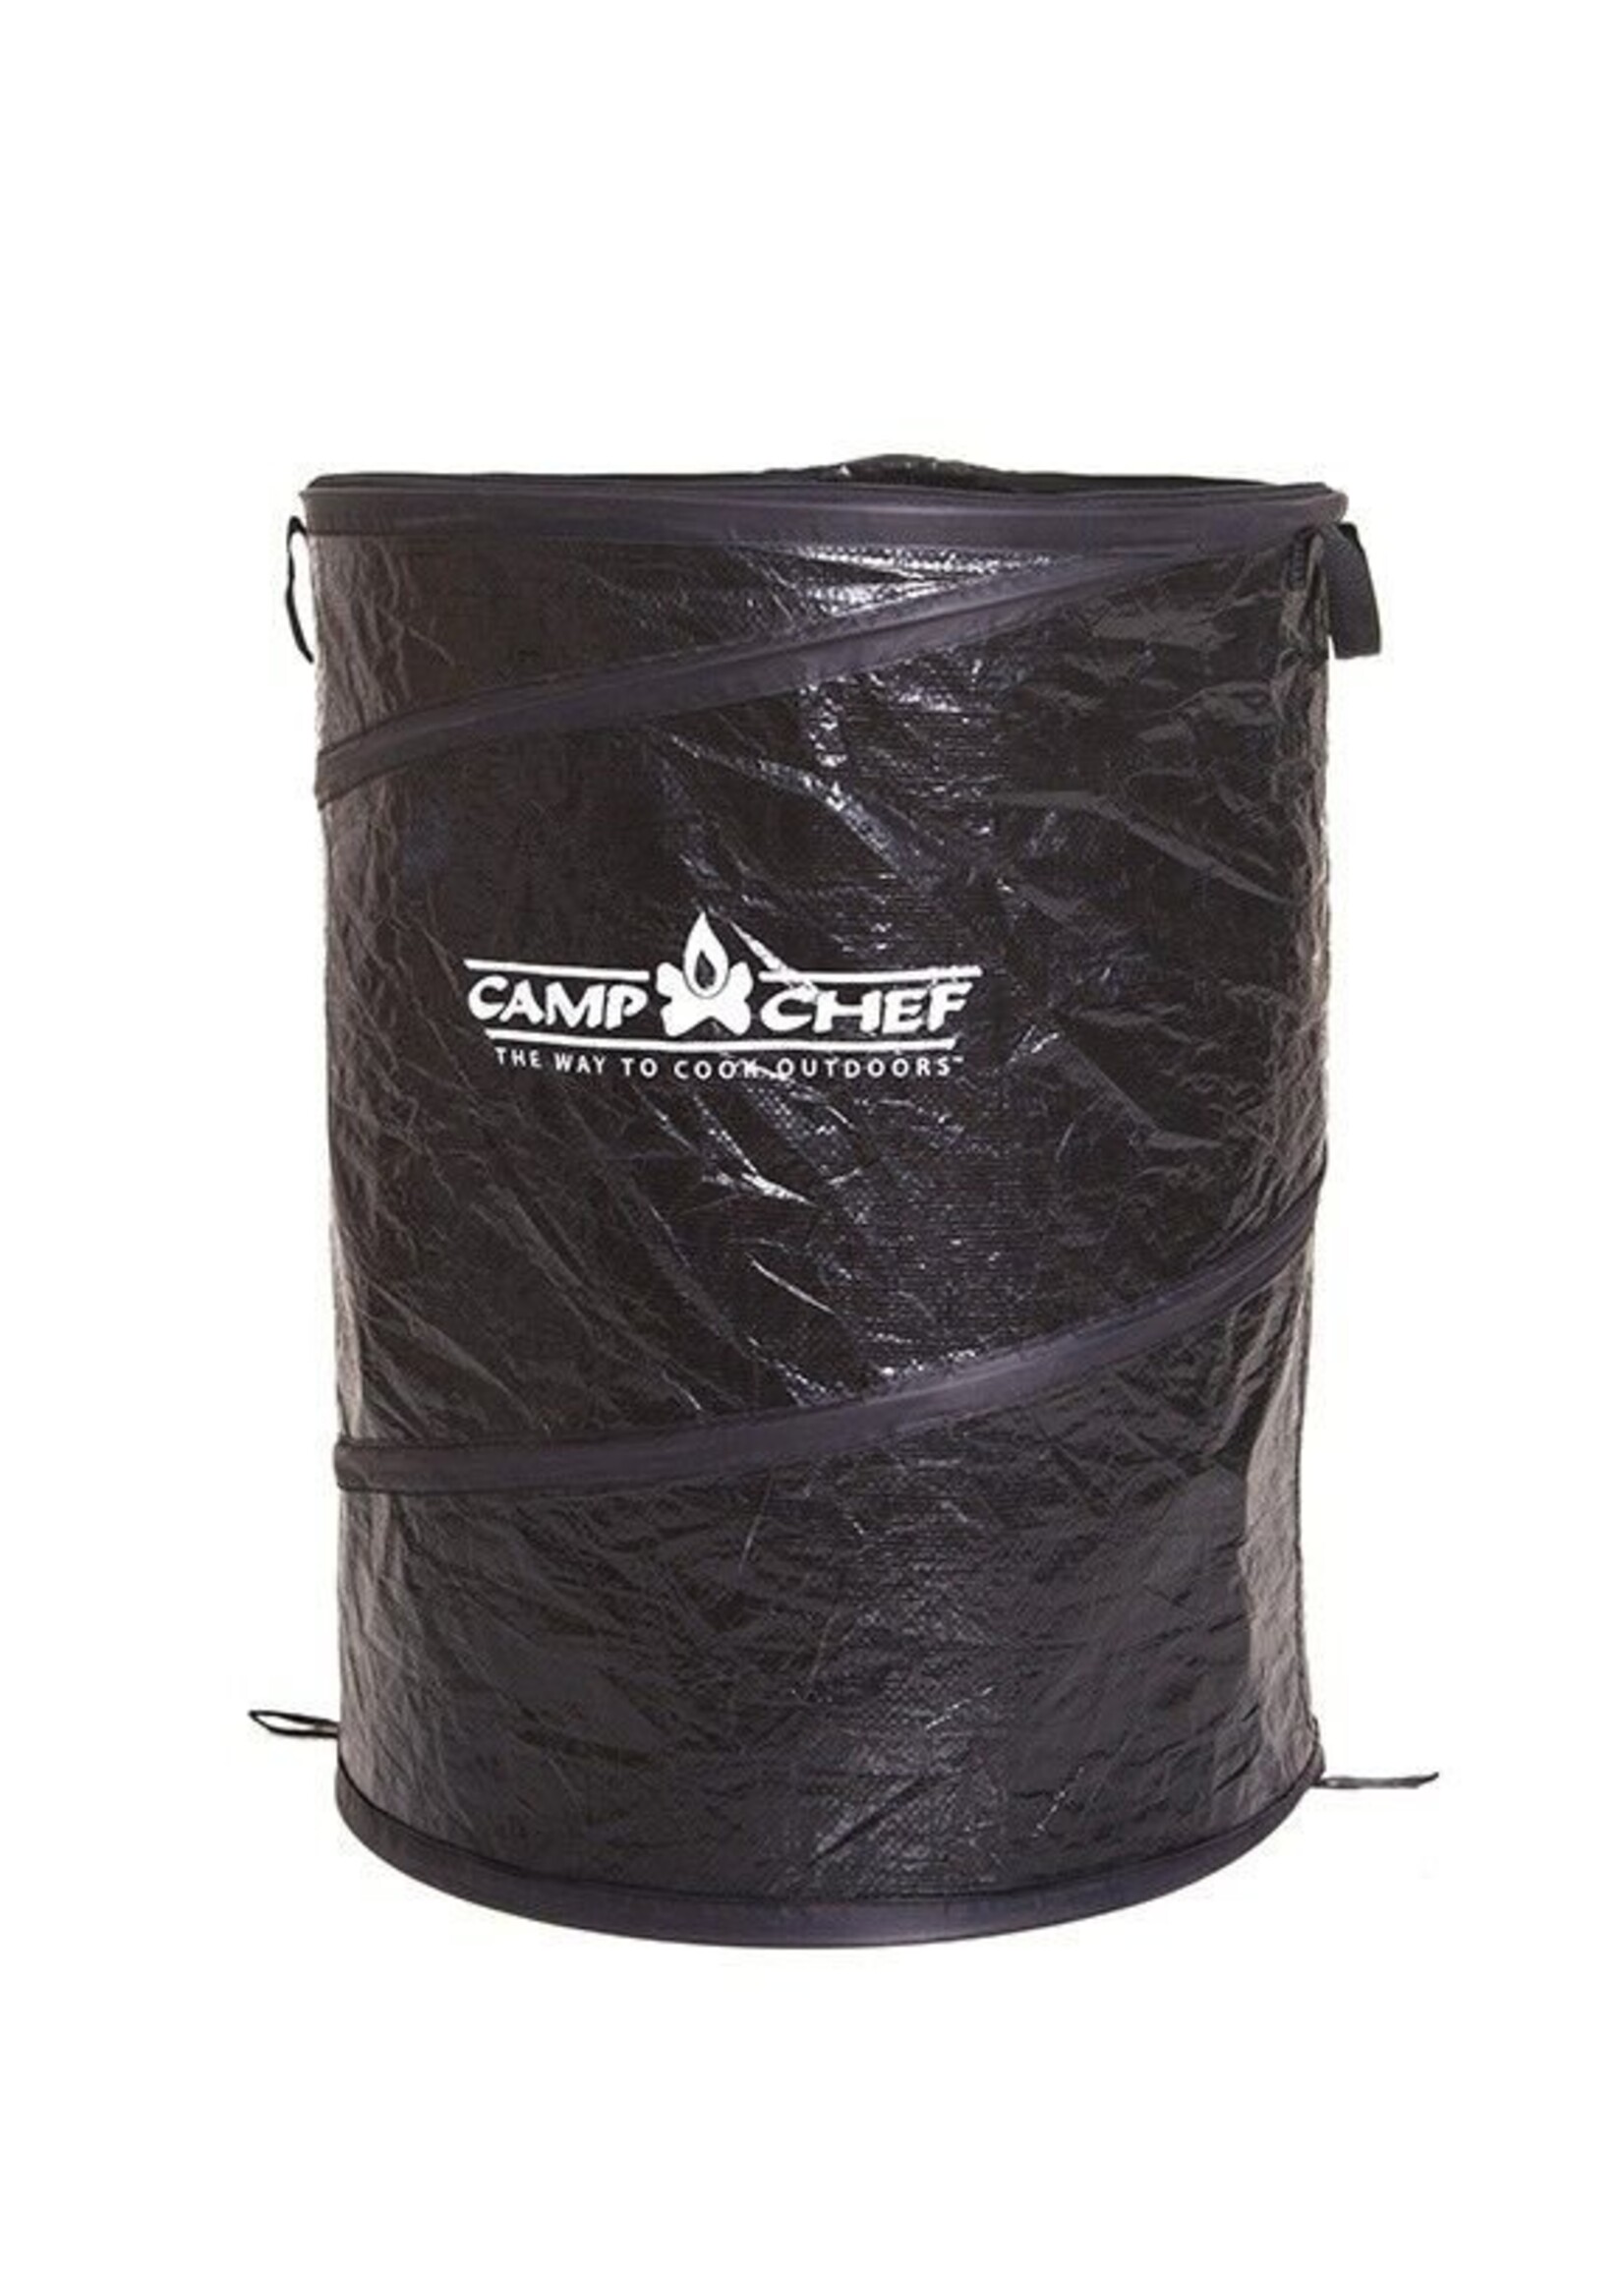 Camp Chef Camp Chef Collapsible Garbage Can